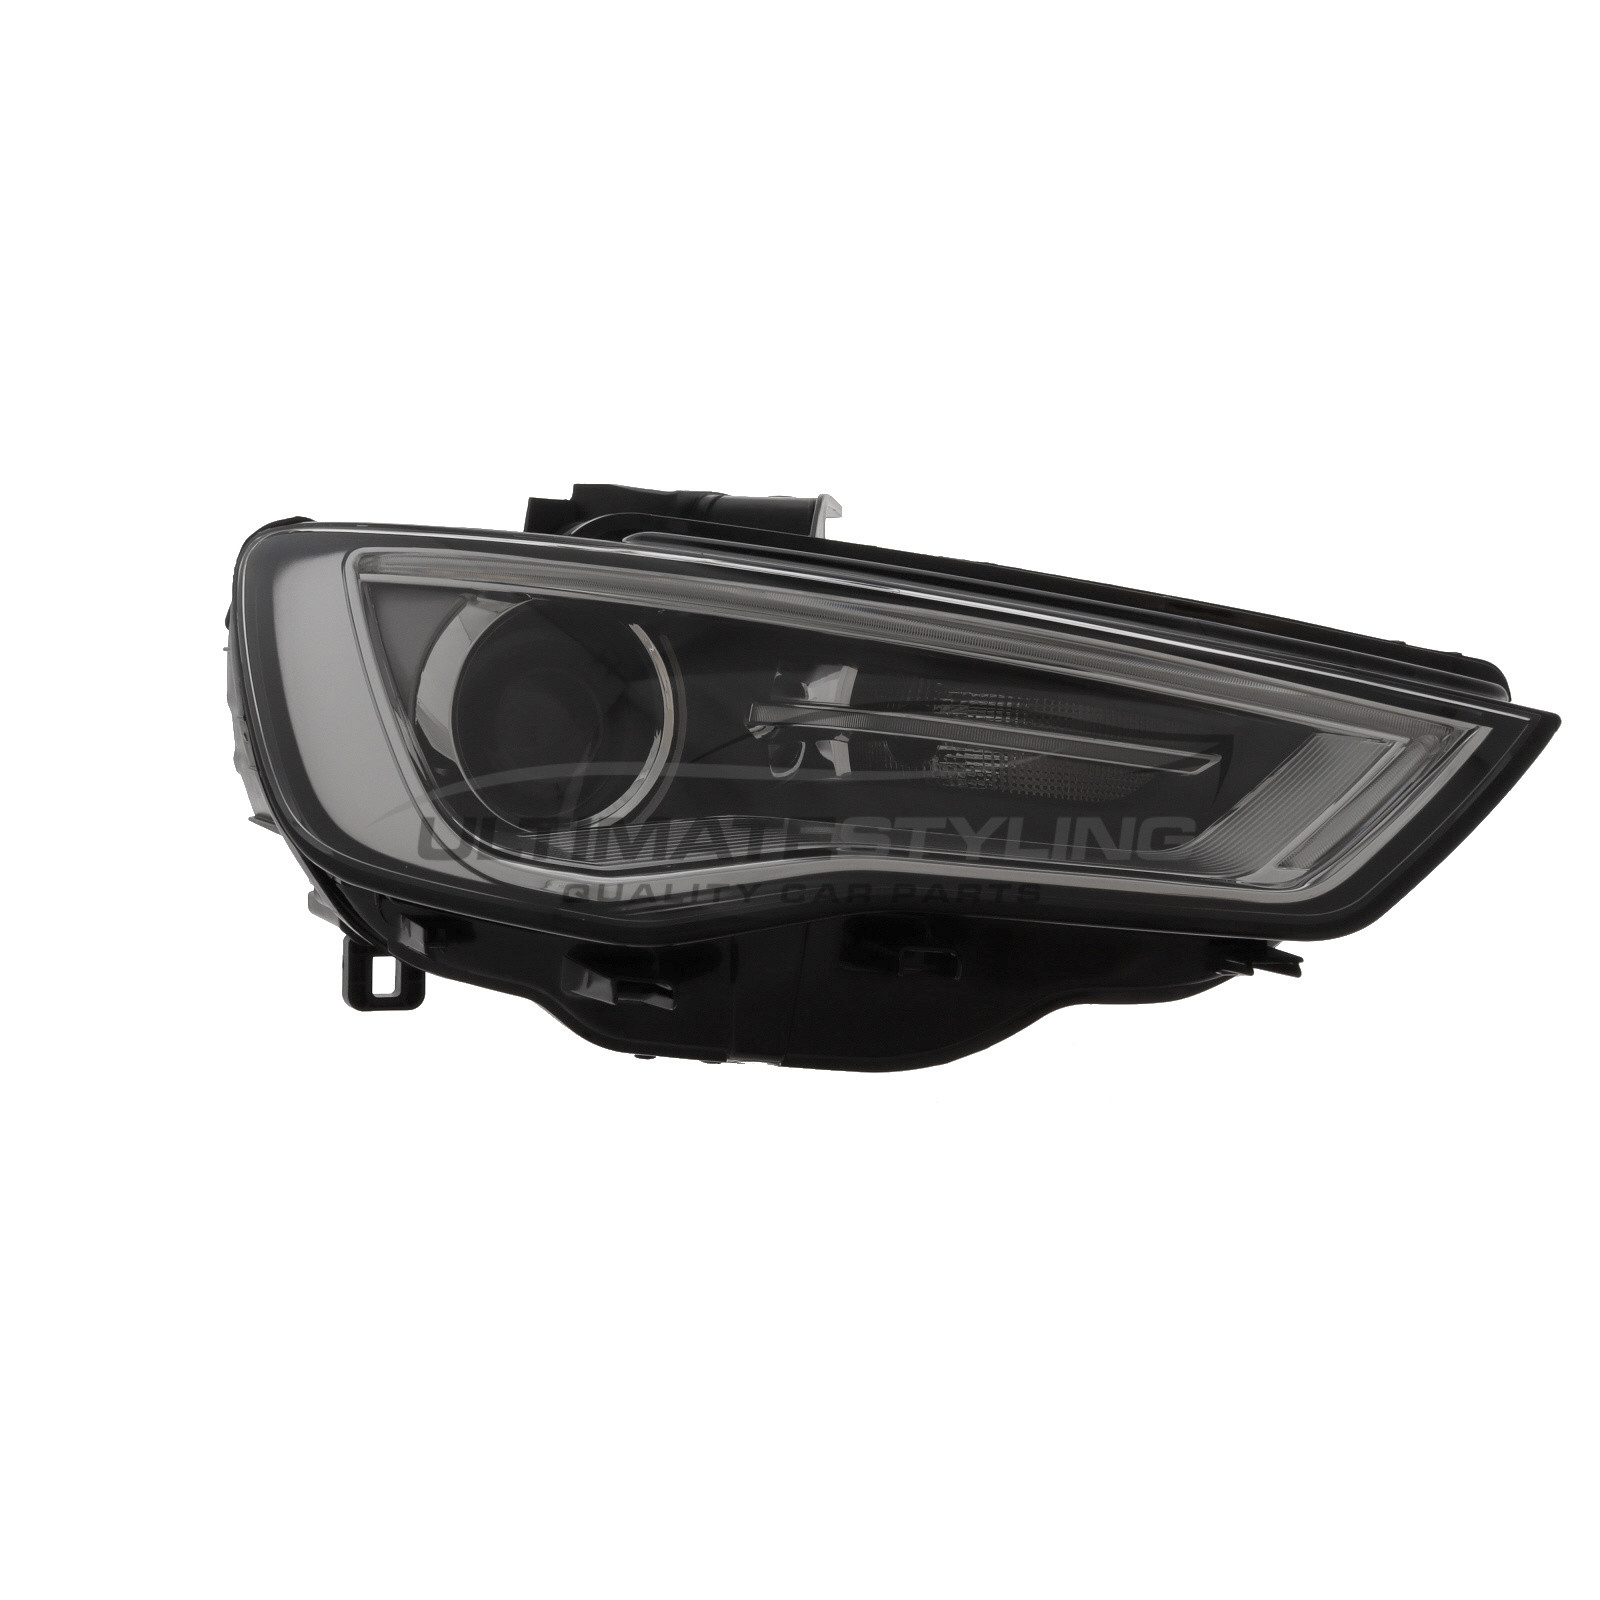 Audi A3 2012-2016, RS3 2012-2016, S3 2012-2016 Xenon With LED Daytime Running Lamp, Electric With Motor, Black Headlight / Headlamp Drivers Side (RH)